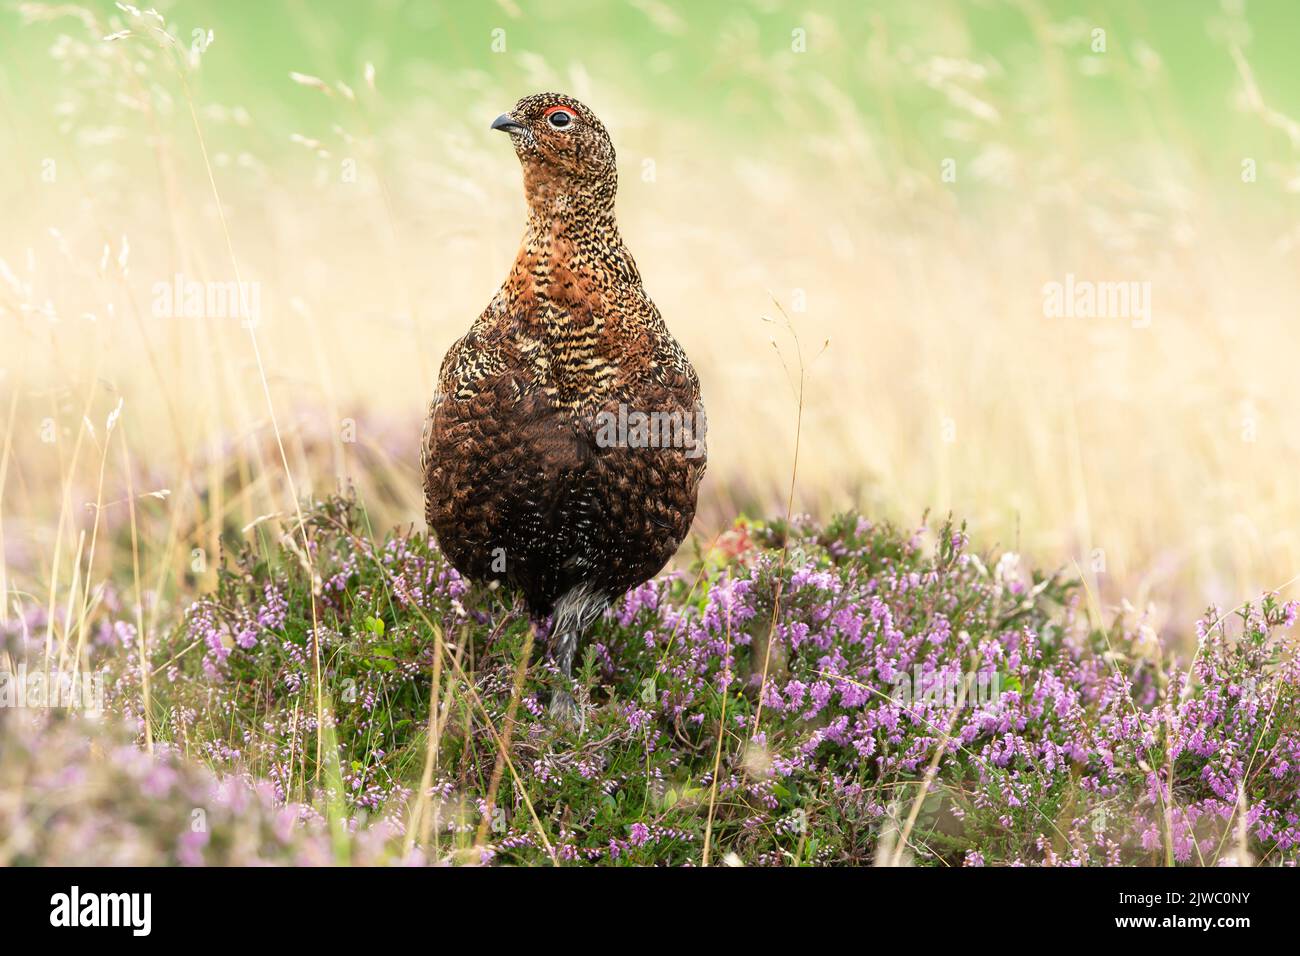 Close up of a Red Grouse male with red eyebrow stood in natural habitat of grasses and purple heather. Facing left.  Scientific name: Lagopus Lagopus. Stock Photo